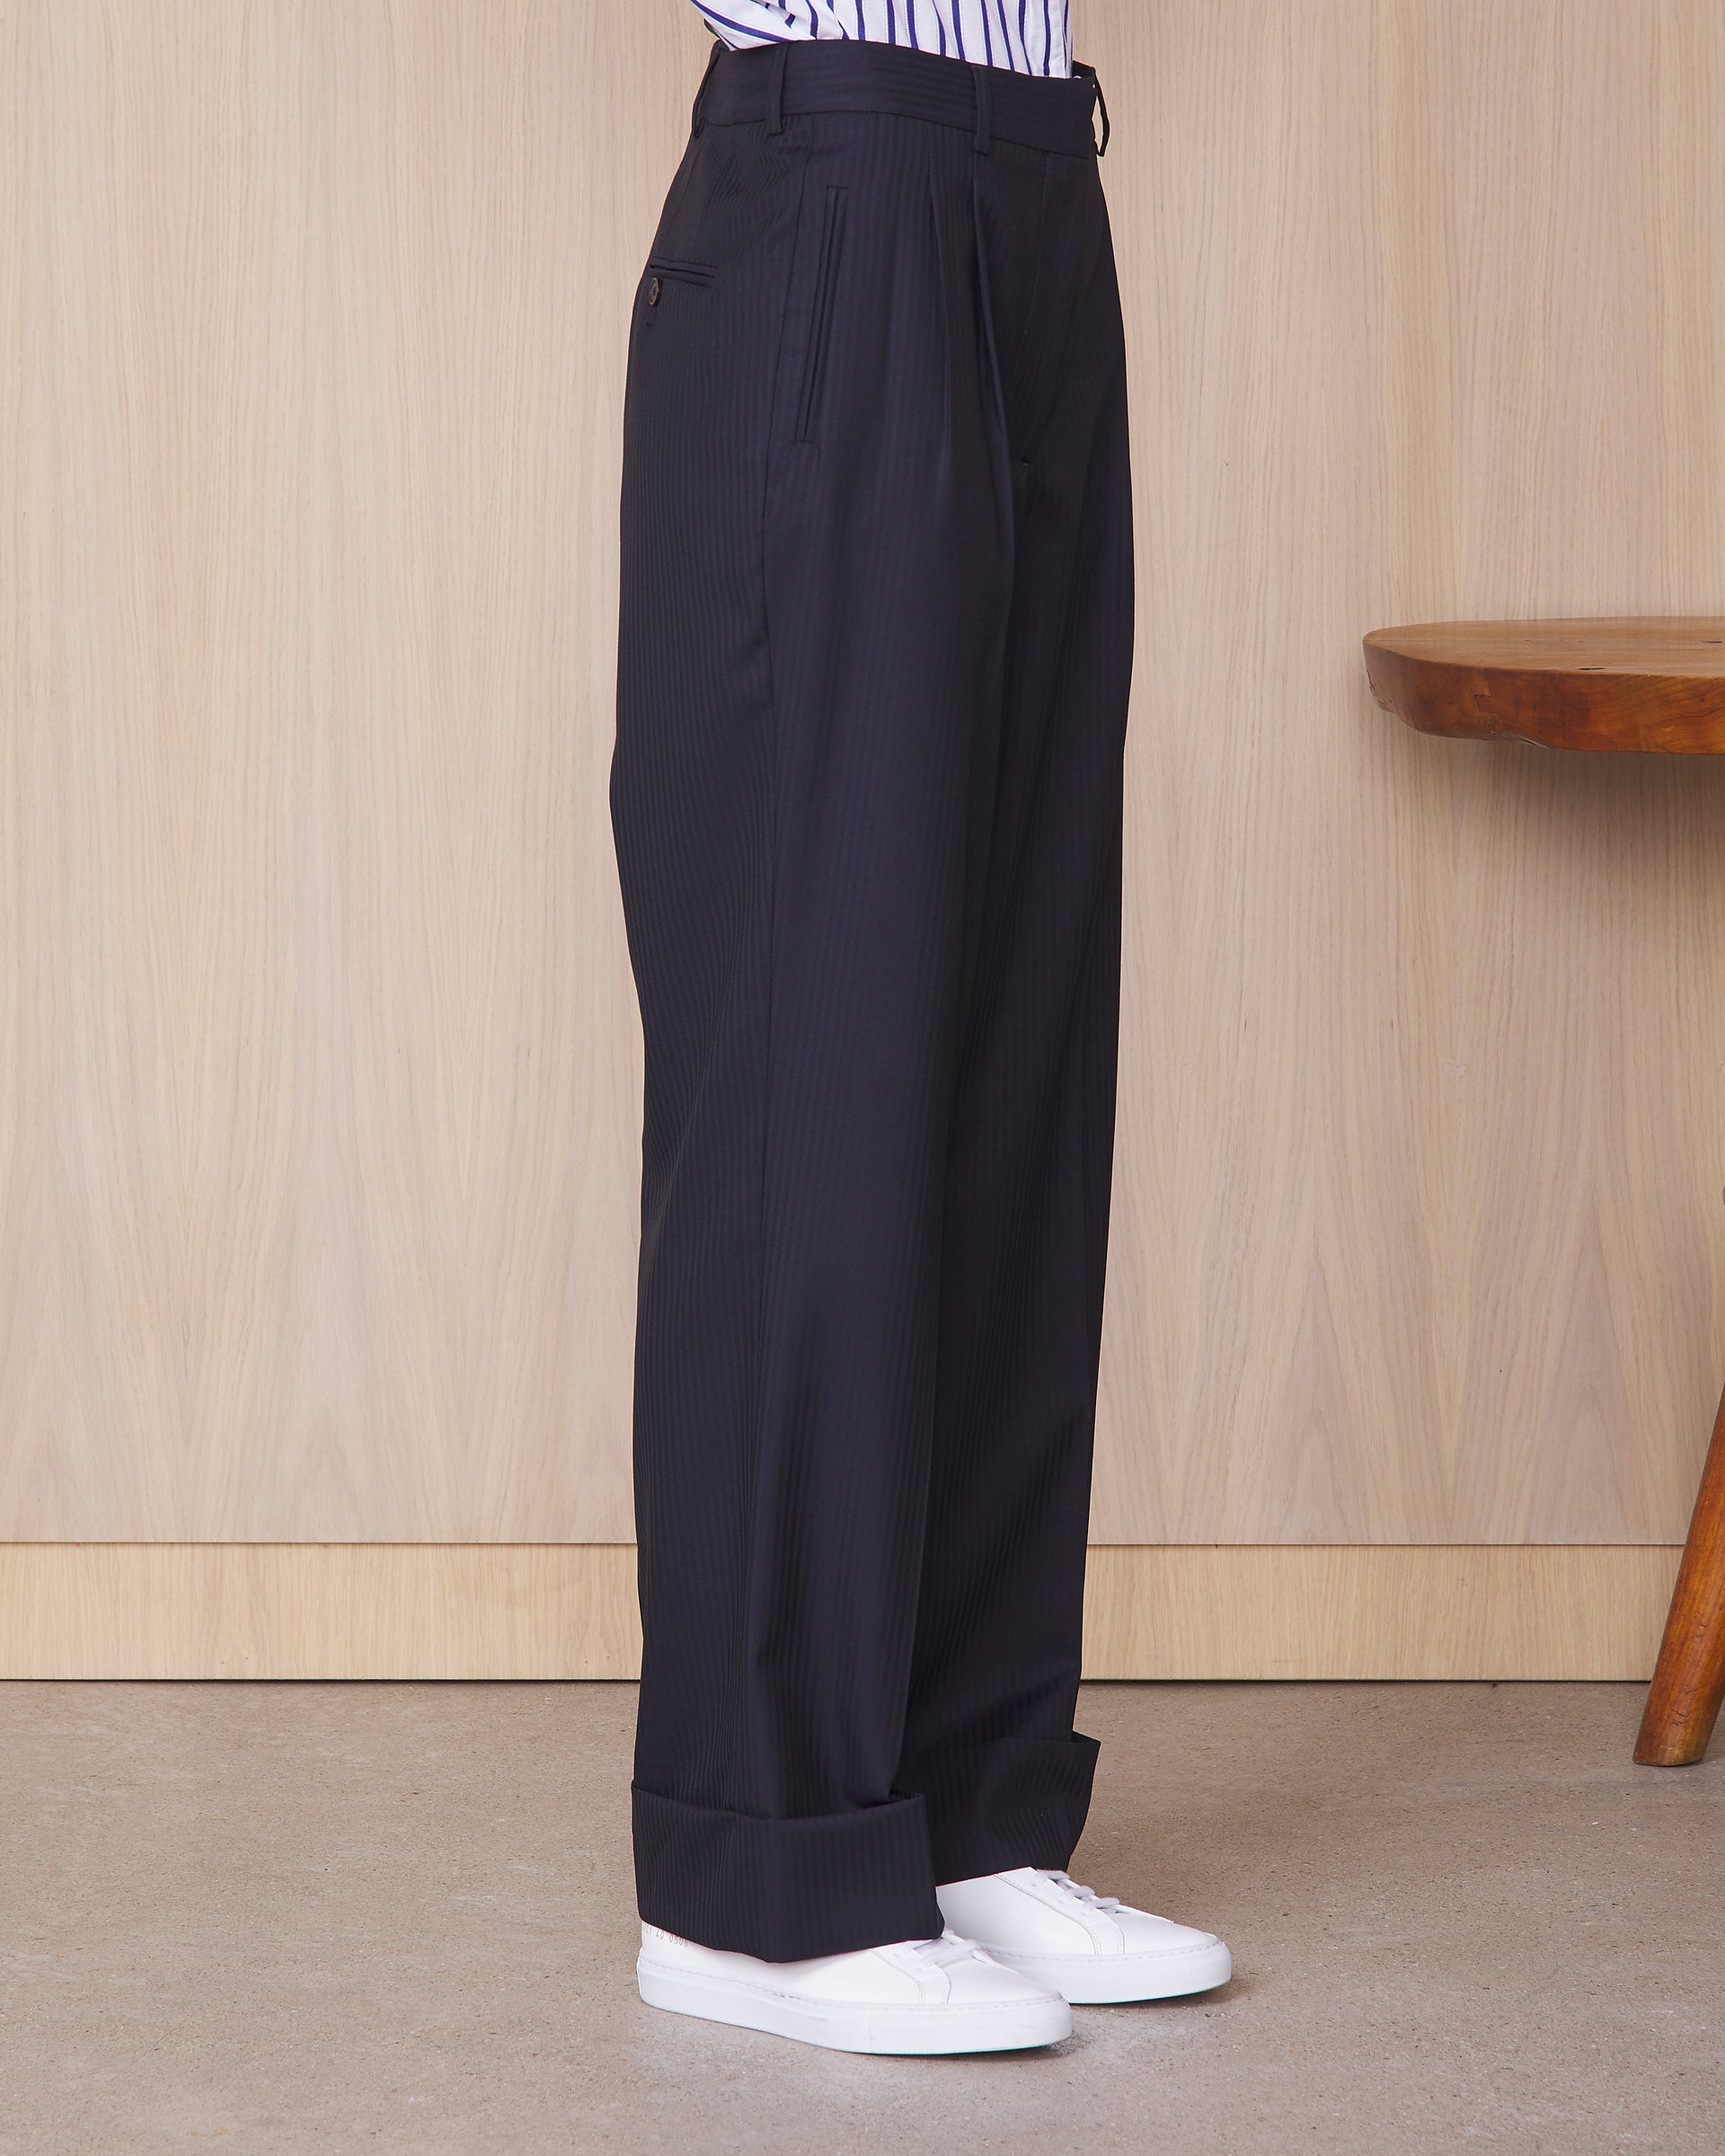 Willow pants - Image 3